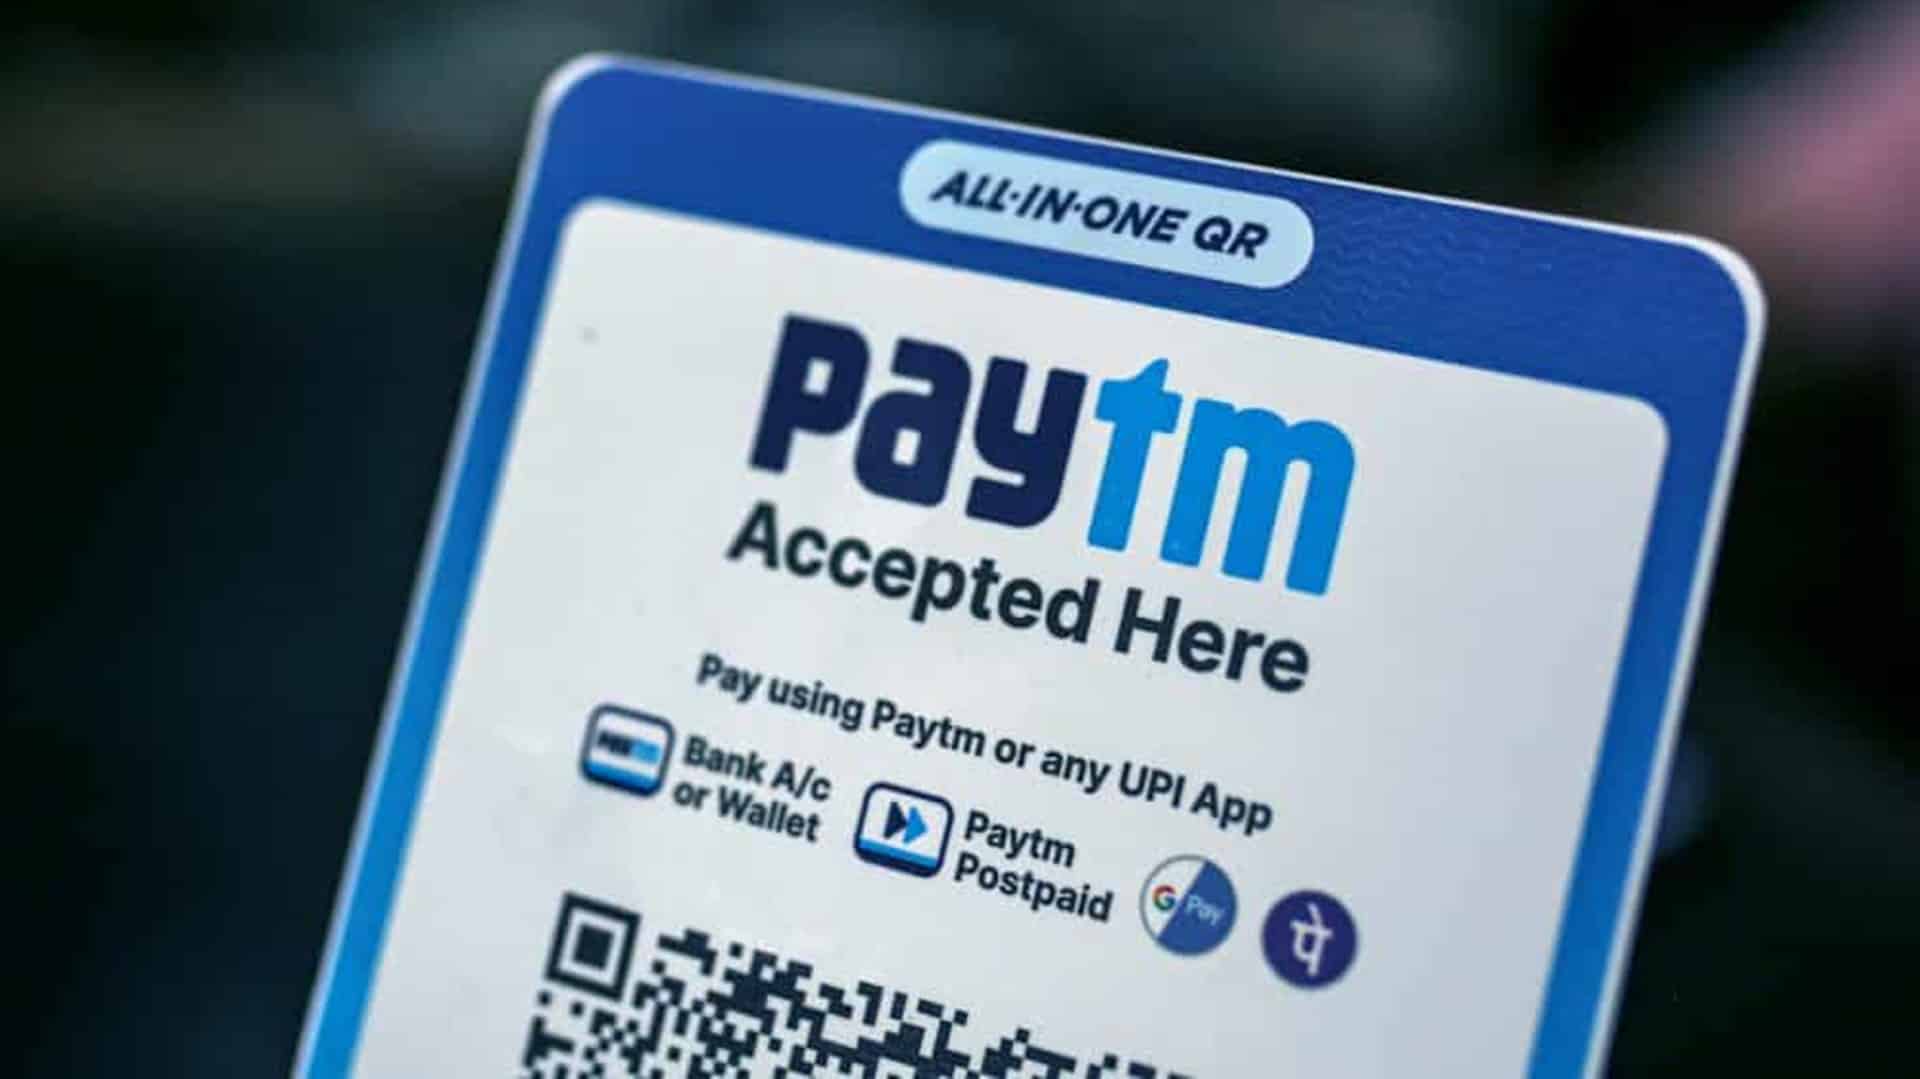 Paytm forms joint venture general insurance firm, to invest Rs 950 cr